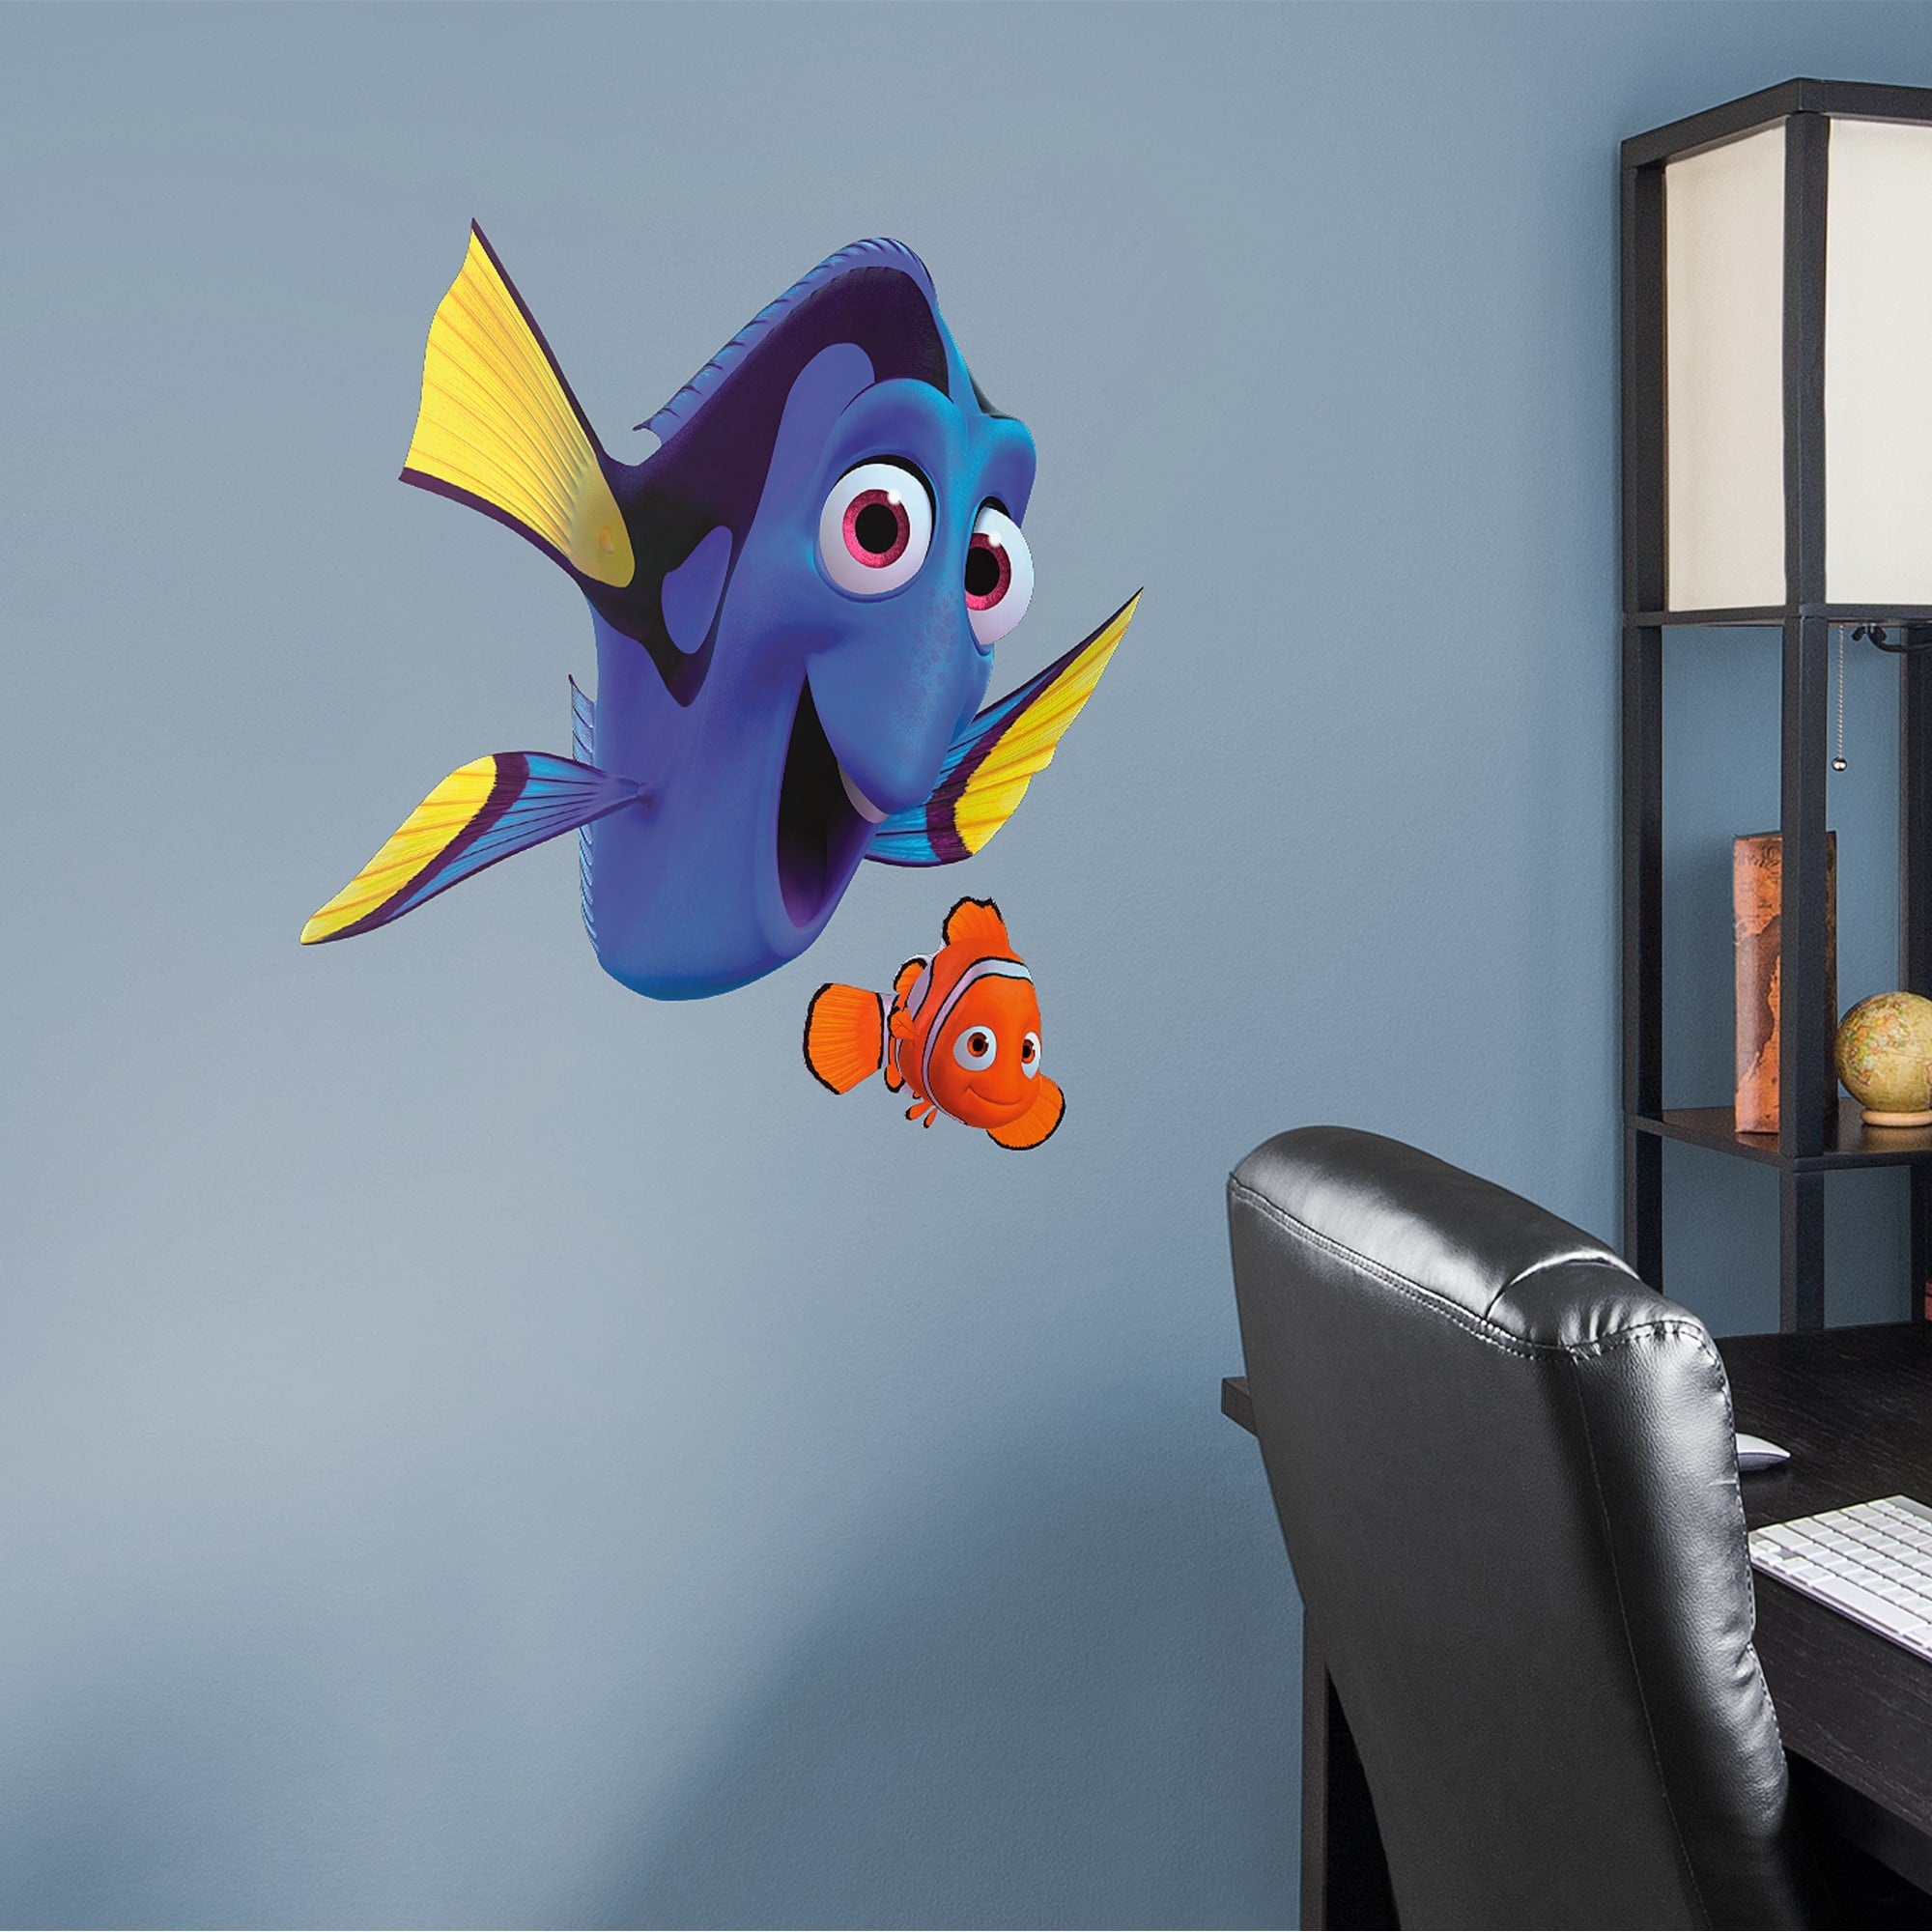 Nemo and Dory: Finding Dory - Officially Licensed Disney/PIXAR Removable Wall Decals 26.0"W x 27.0"H by Fathead | Vinyl